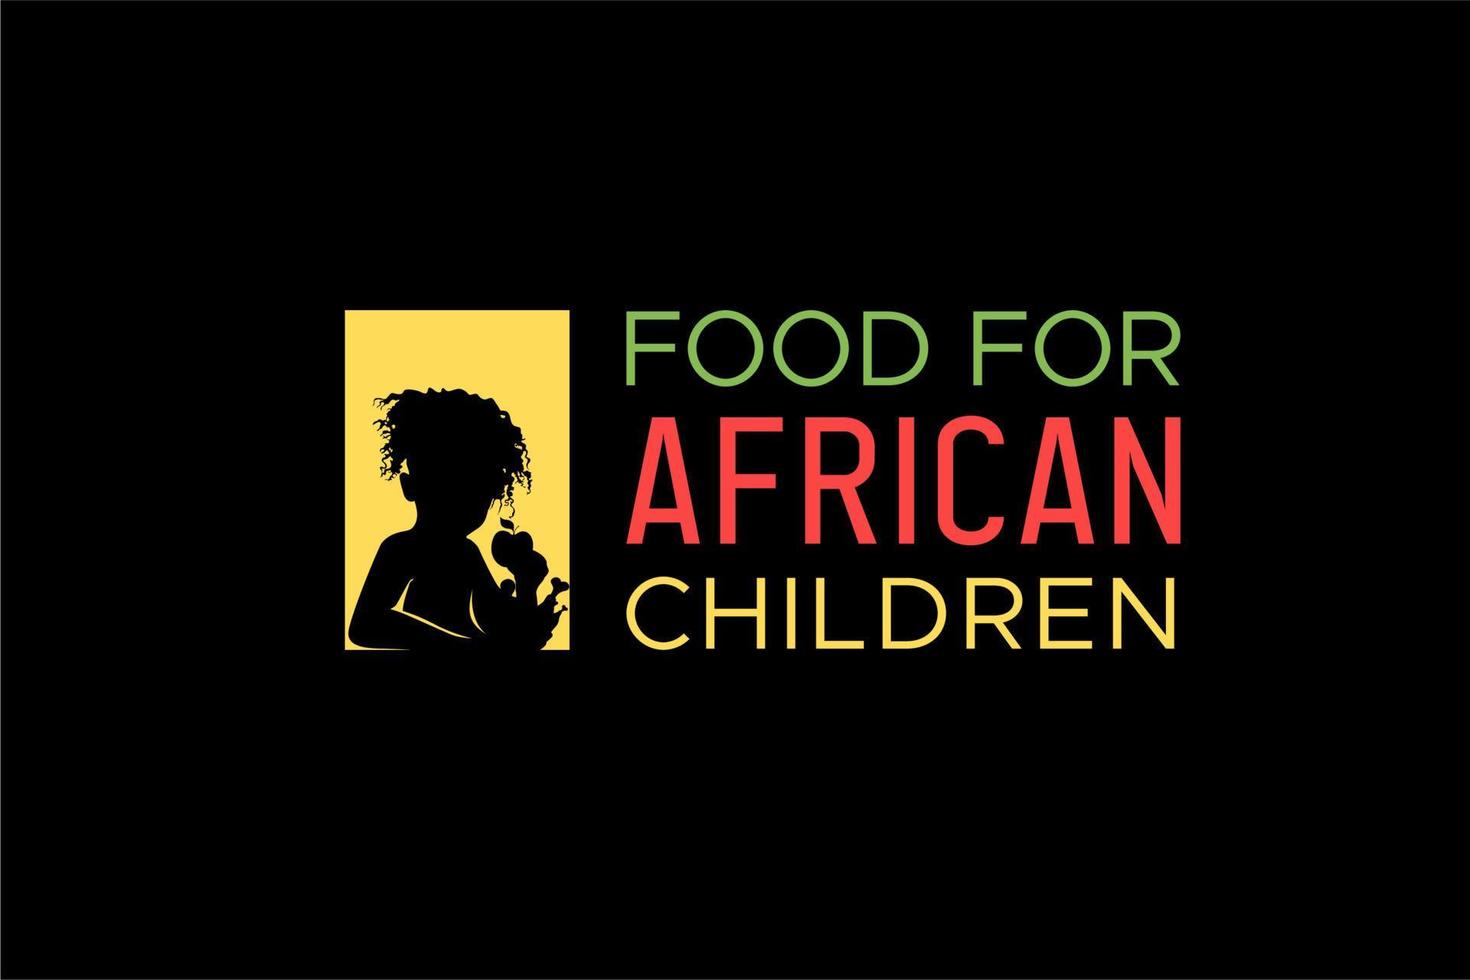 Silhouette of African Children Eat Fruit and Meat logo design vector